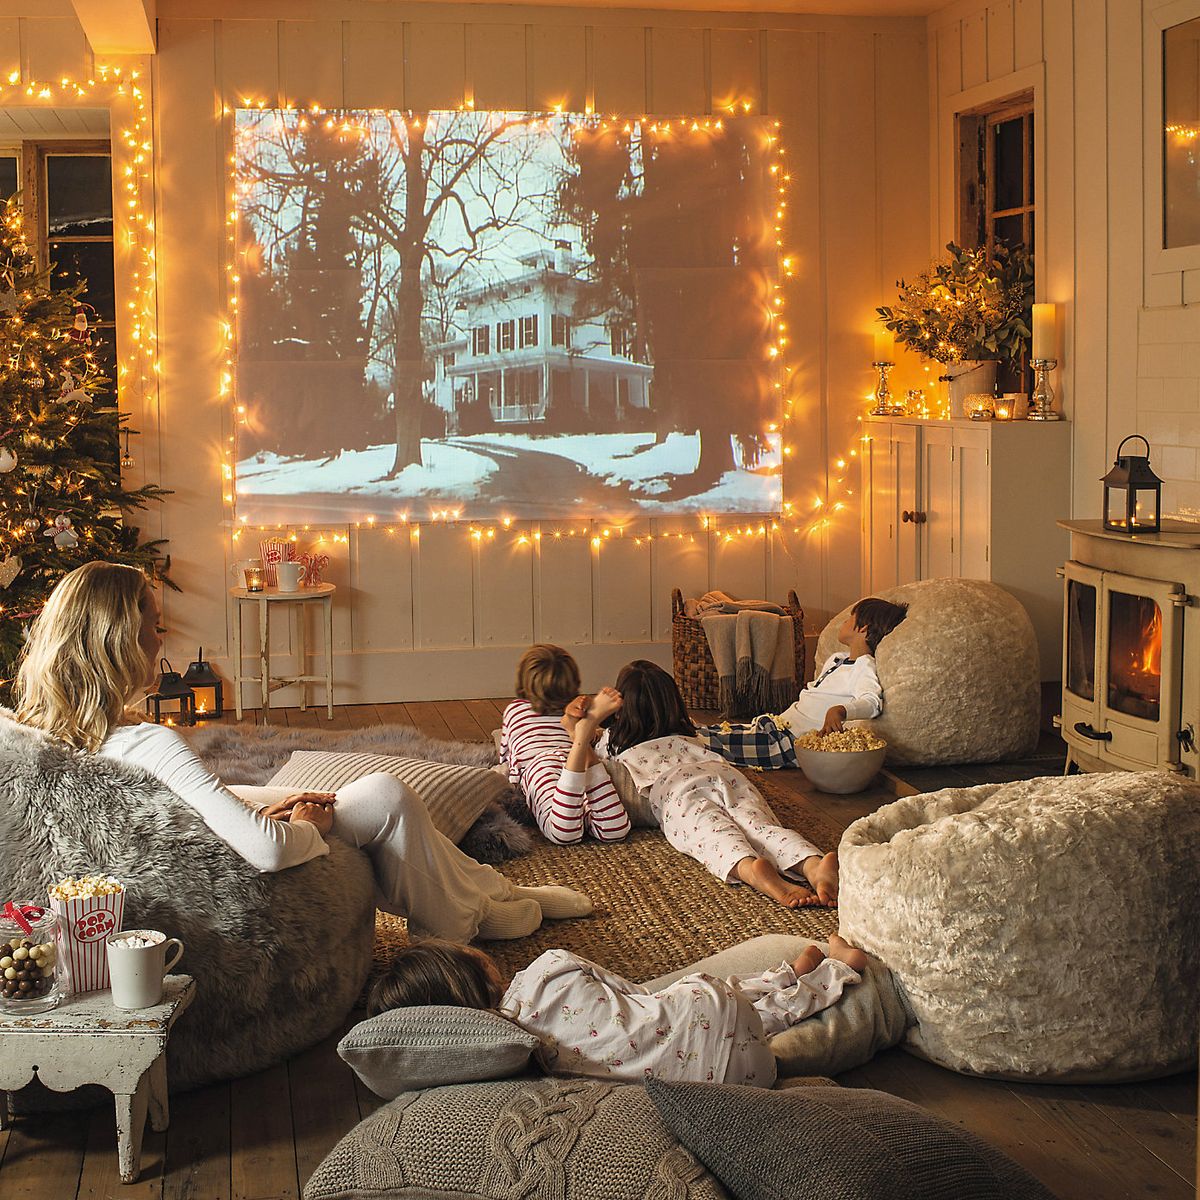 7 Movies For Your Next Lazy Winter Evening